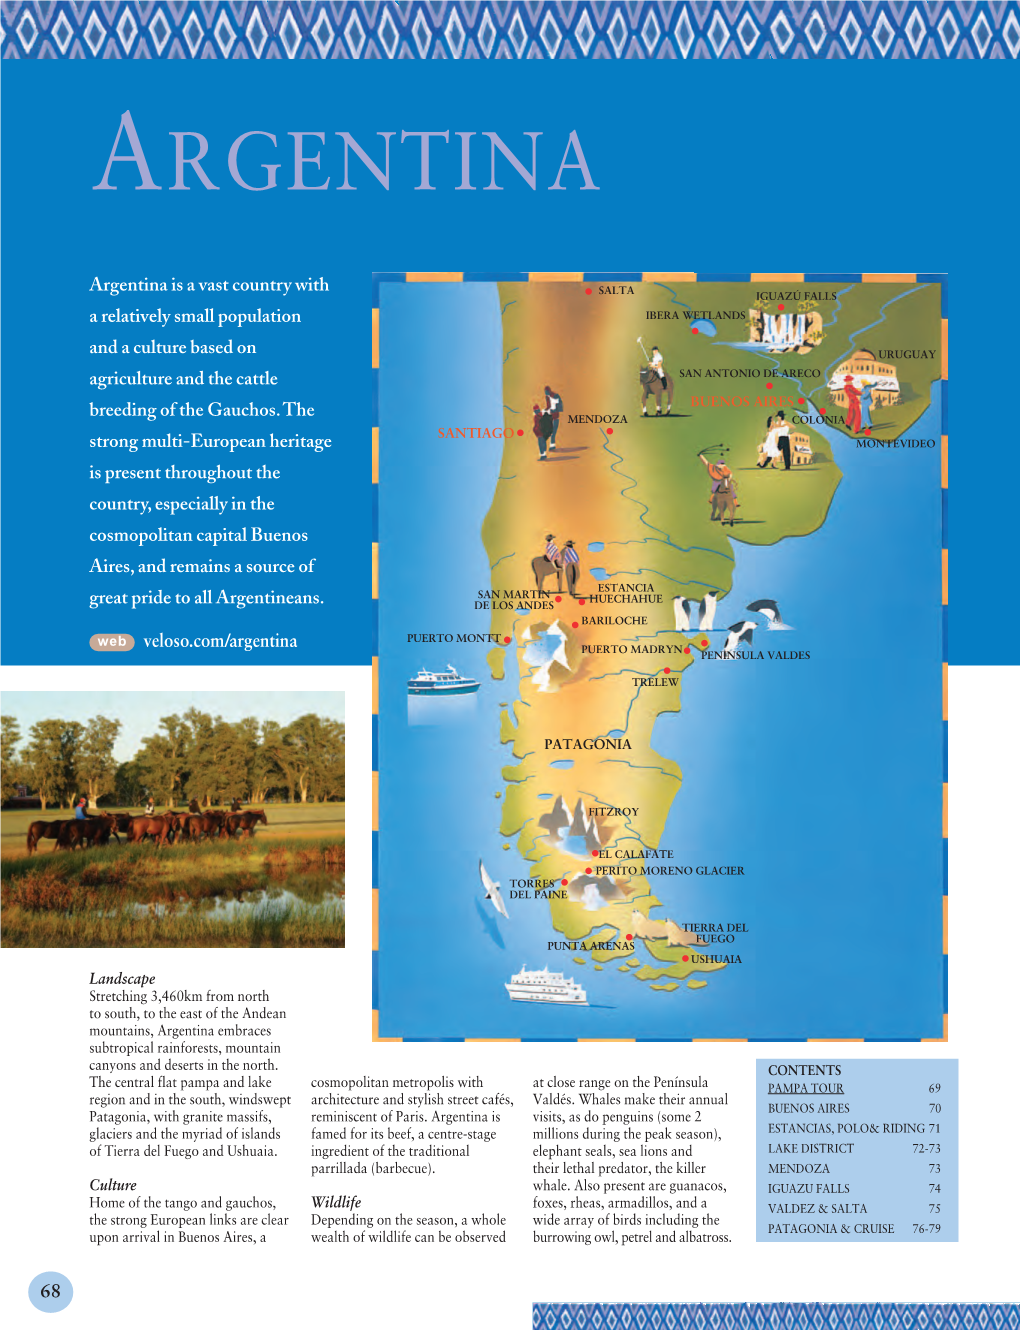 Download Our Argentina Brochure